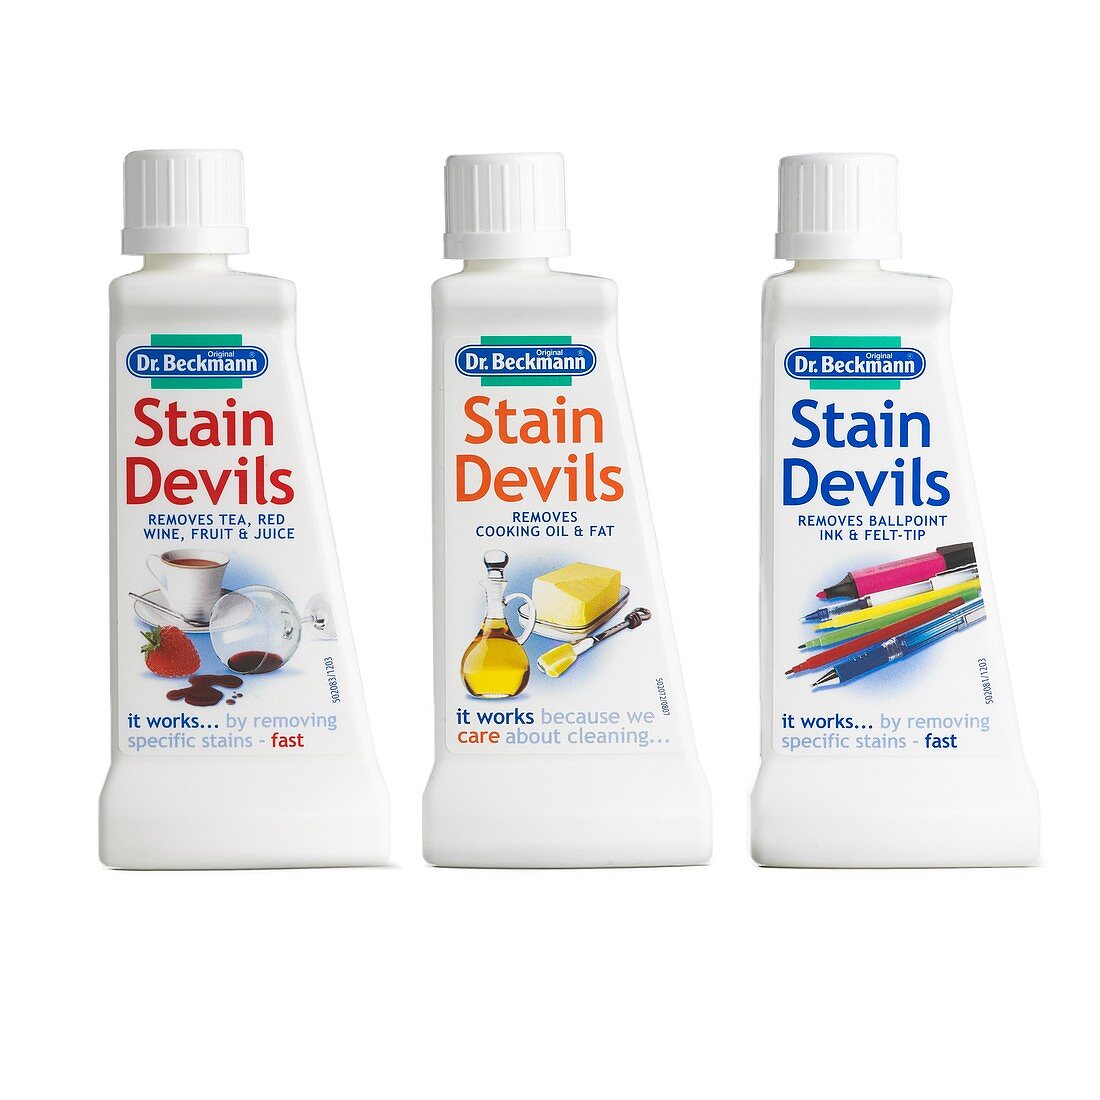 Stain removers